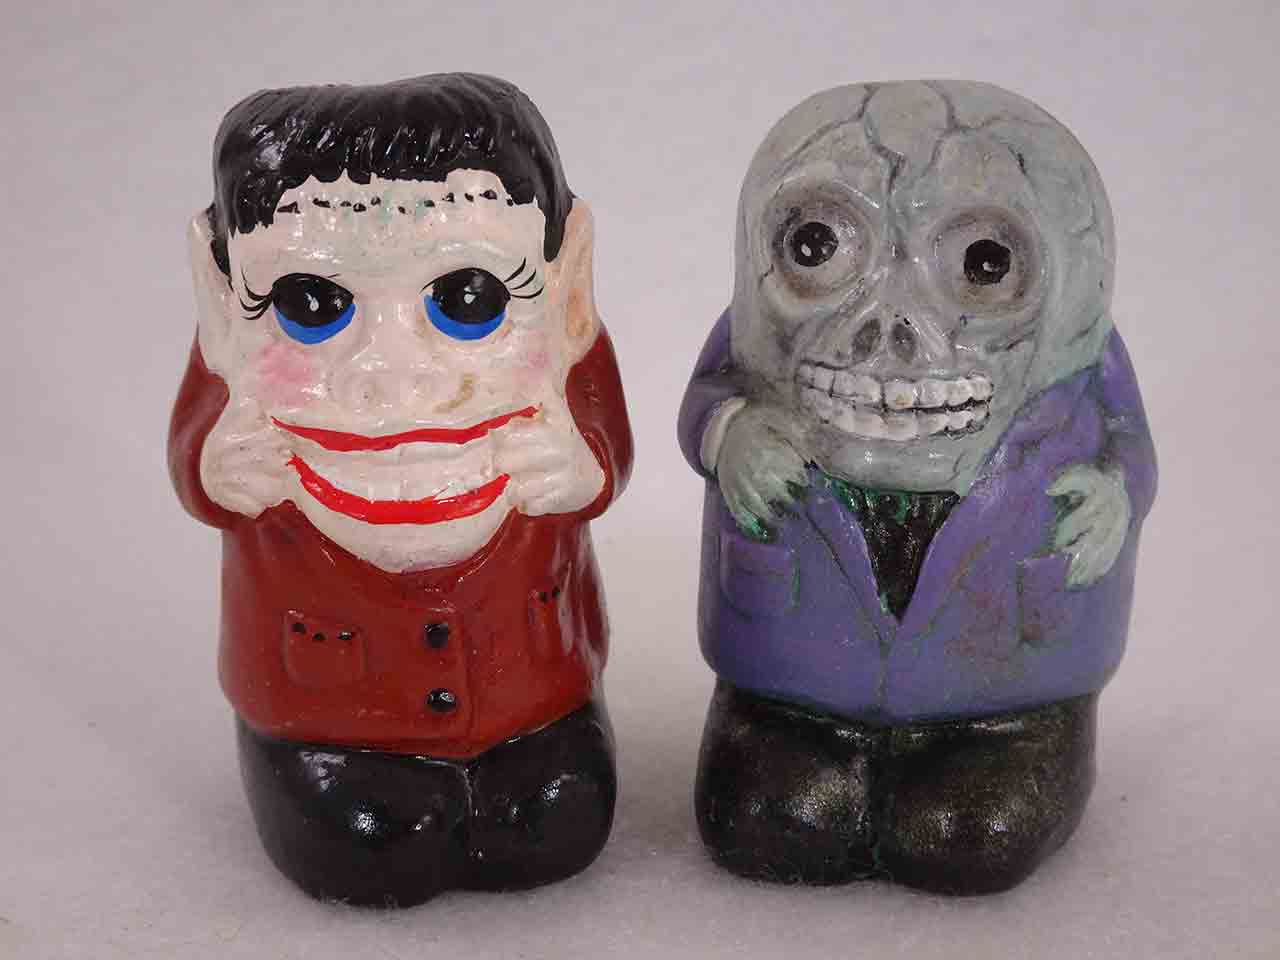 Halloween characters salt and pepper shakers possibly made by Jean Grief - Skeleton & Frankenstein